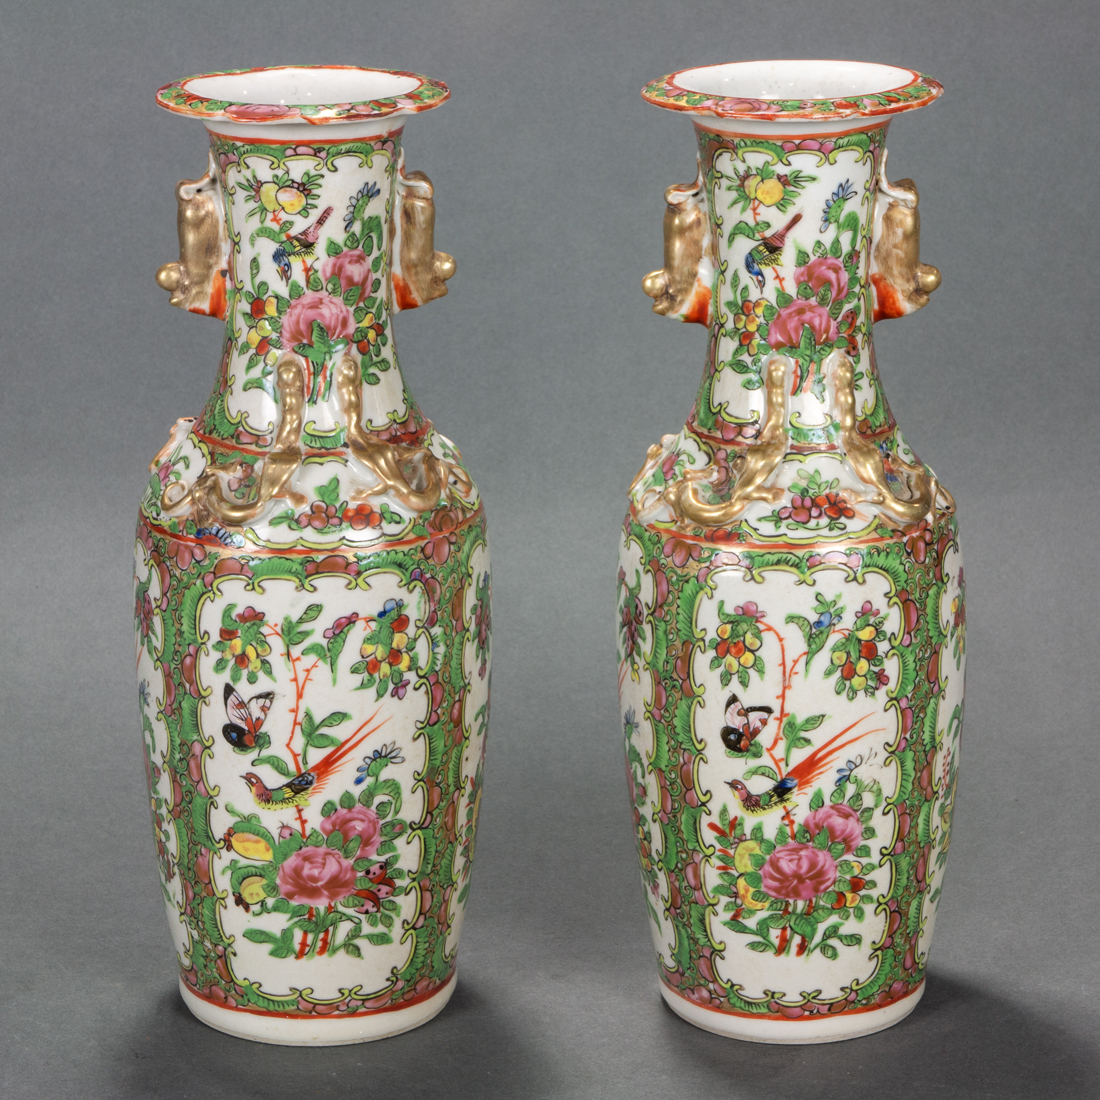 PAIR OF CANTON ROSE MEDALLION VASES 3a1043